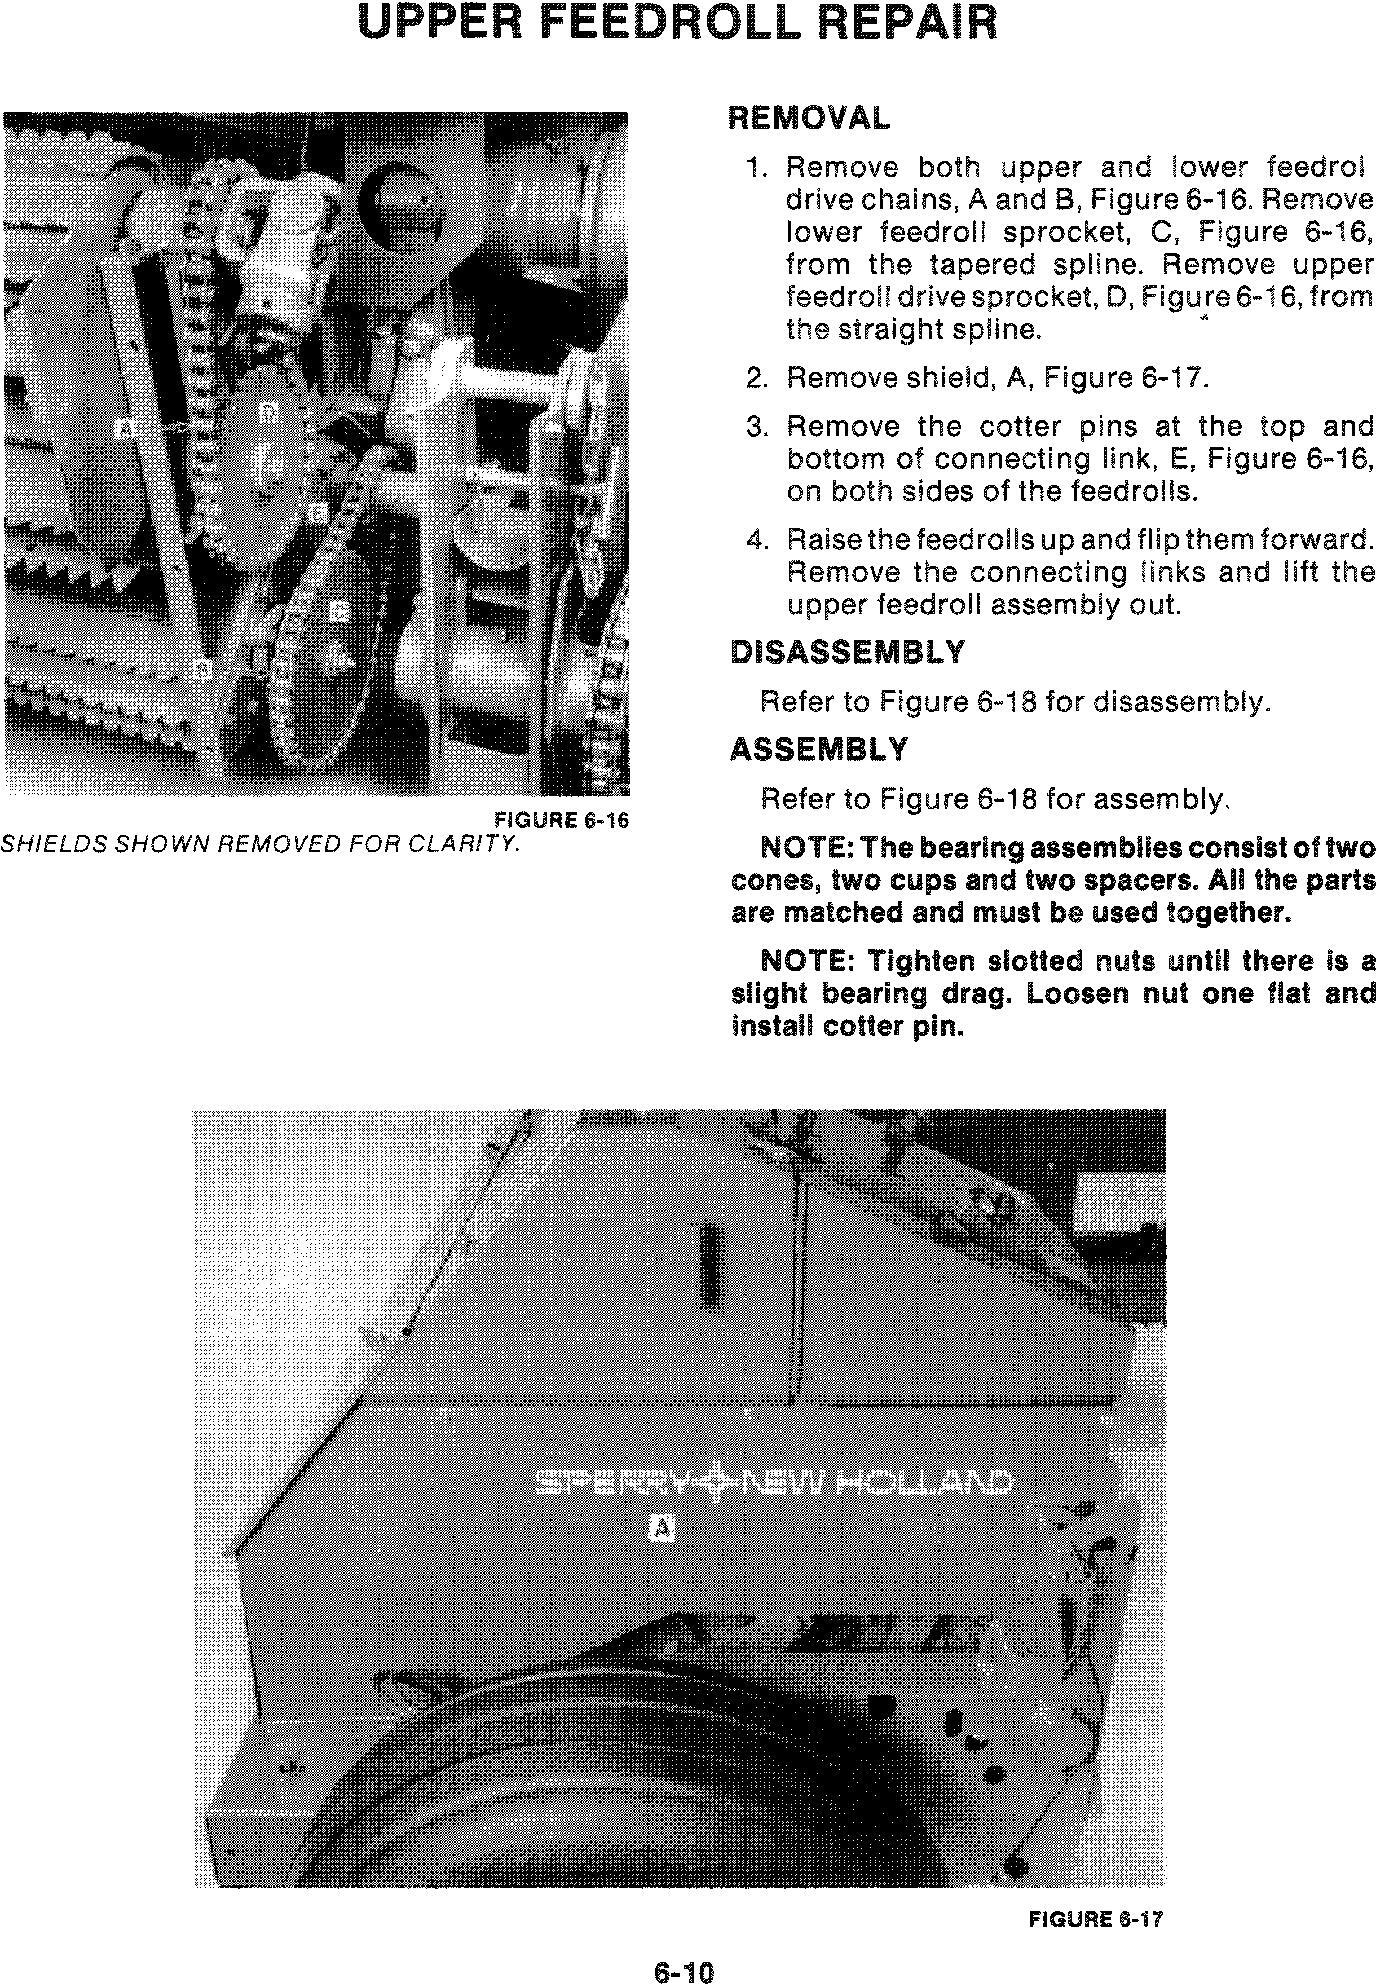 New Holland 1600 Forage Harvester Service Manual - 3